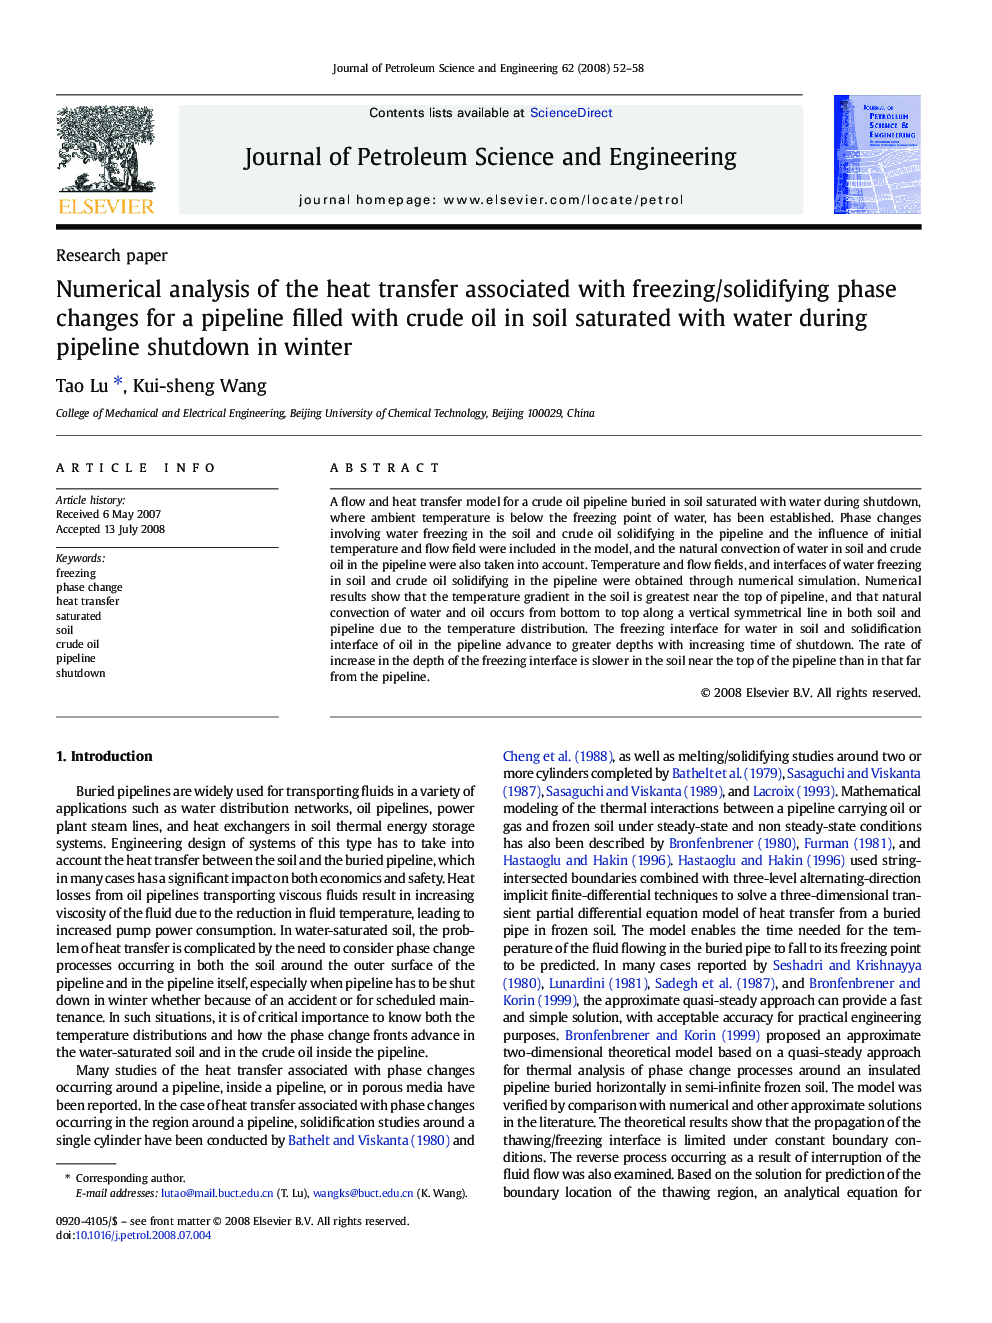 Numerical analysis of the heat transfer associated with freezing/solidifying phase changes for a pipeline filled with crude oil in soil saturated with water during pipeline shutdown in winter